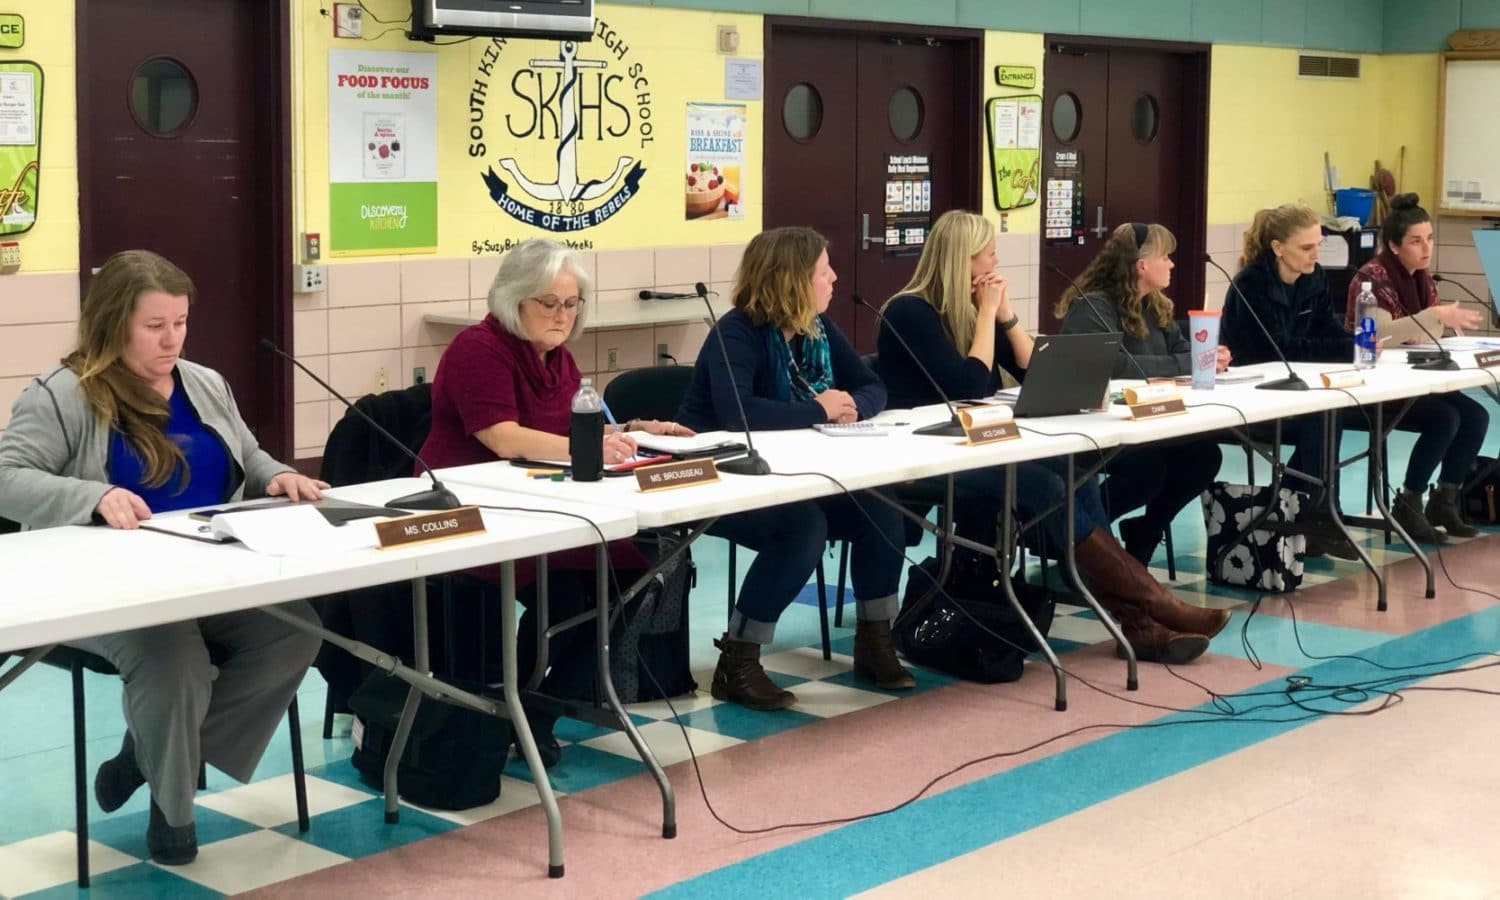 Newly elected South Kingstown School Committee members facing harassment and threats